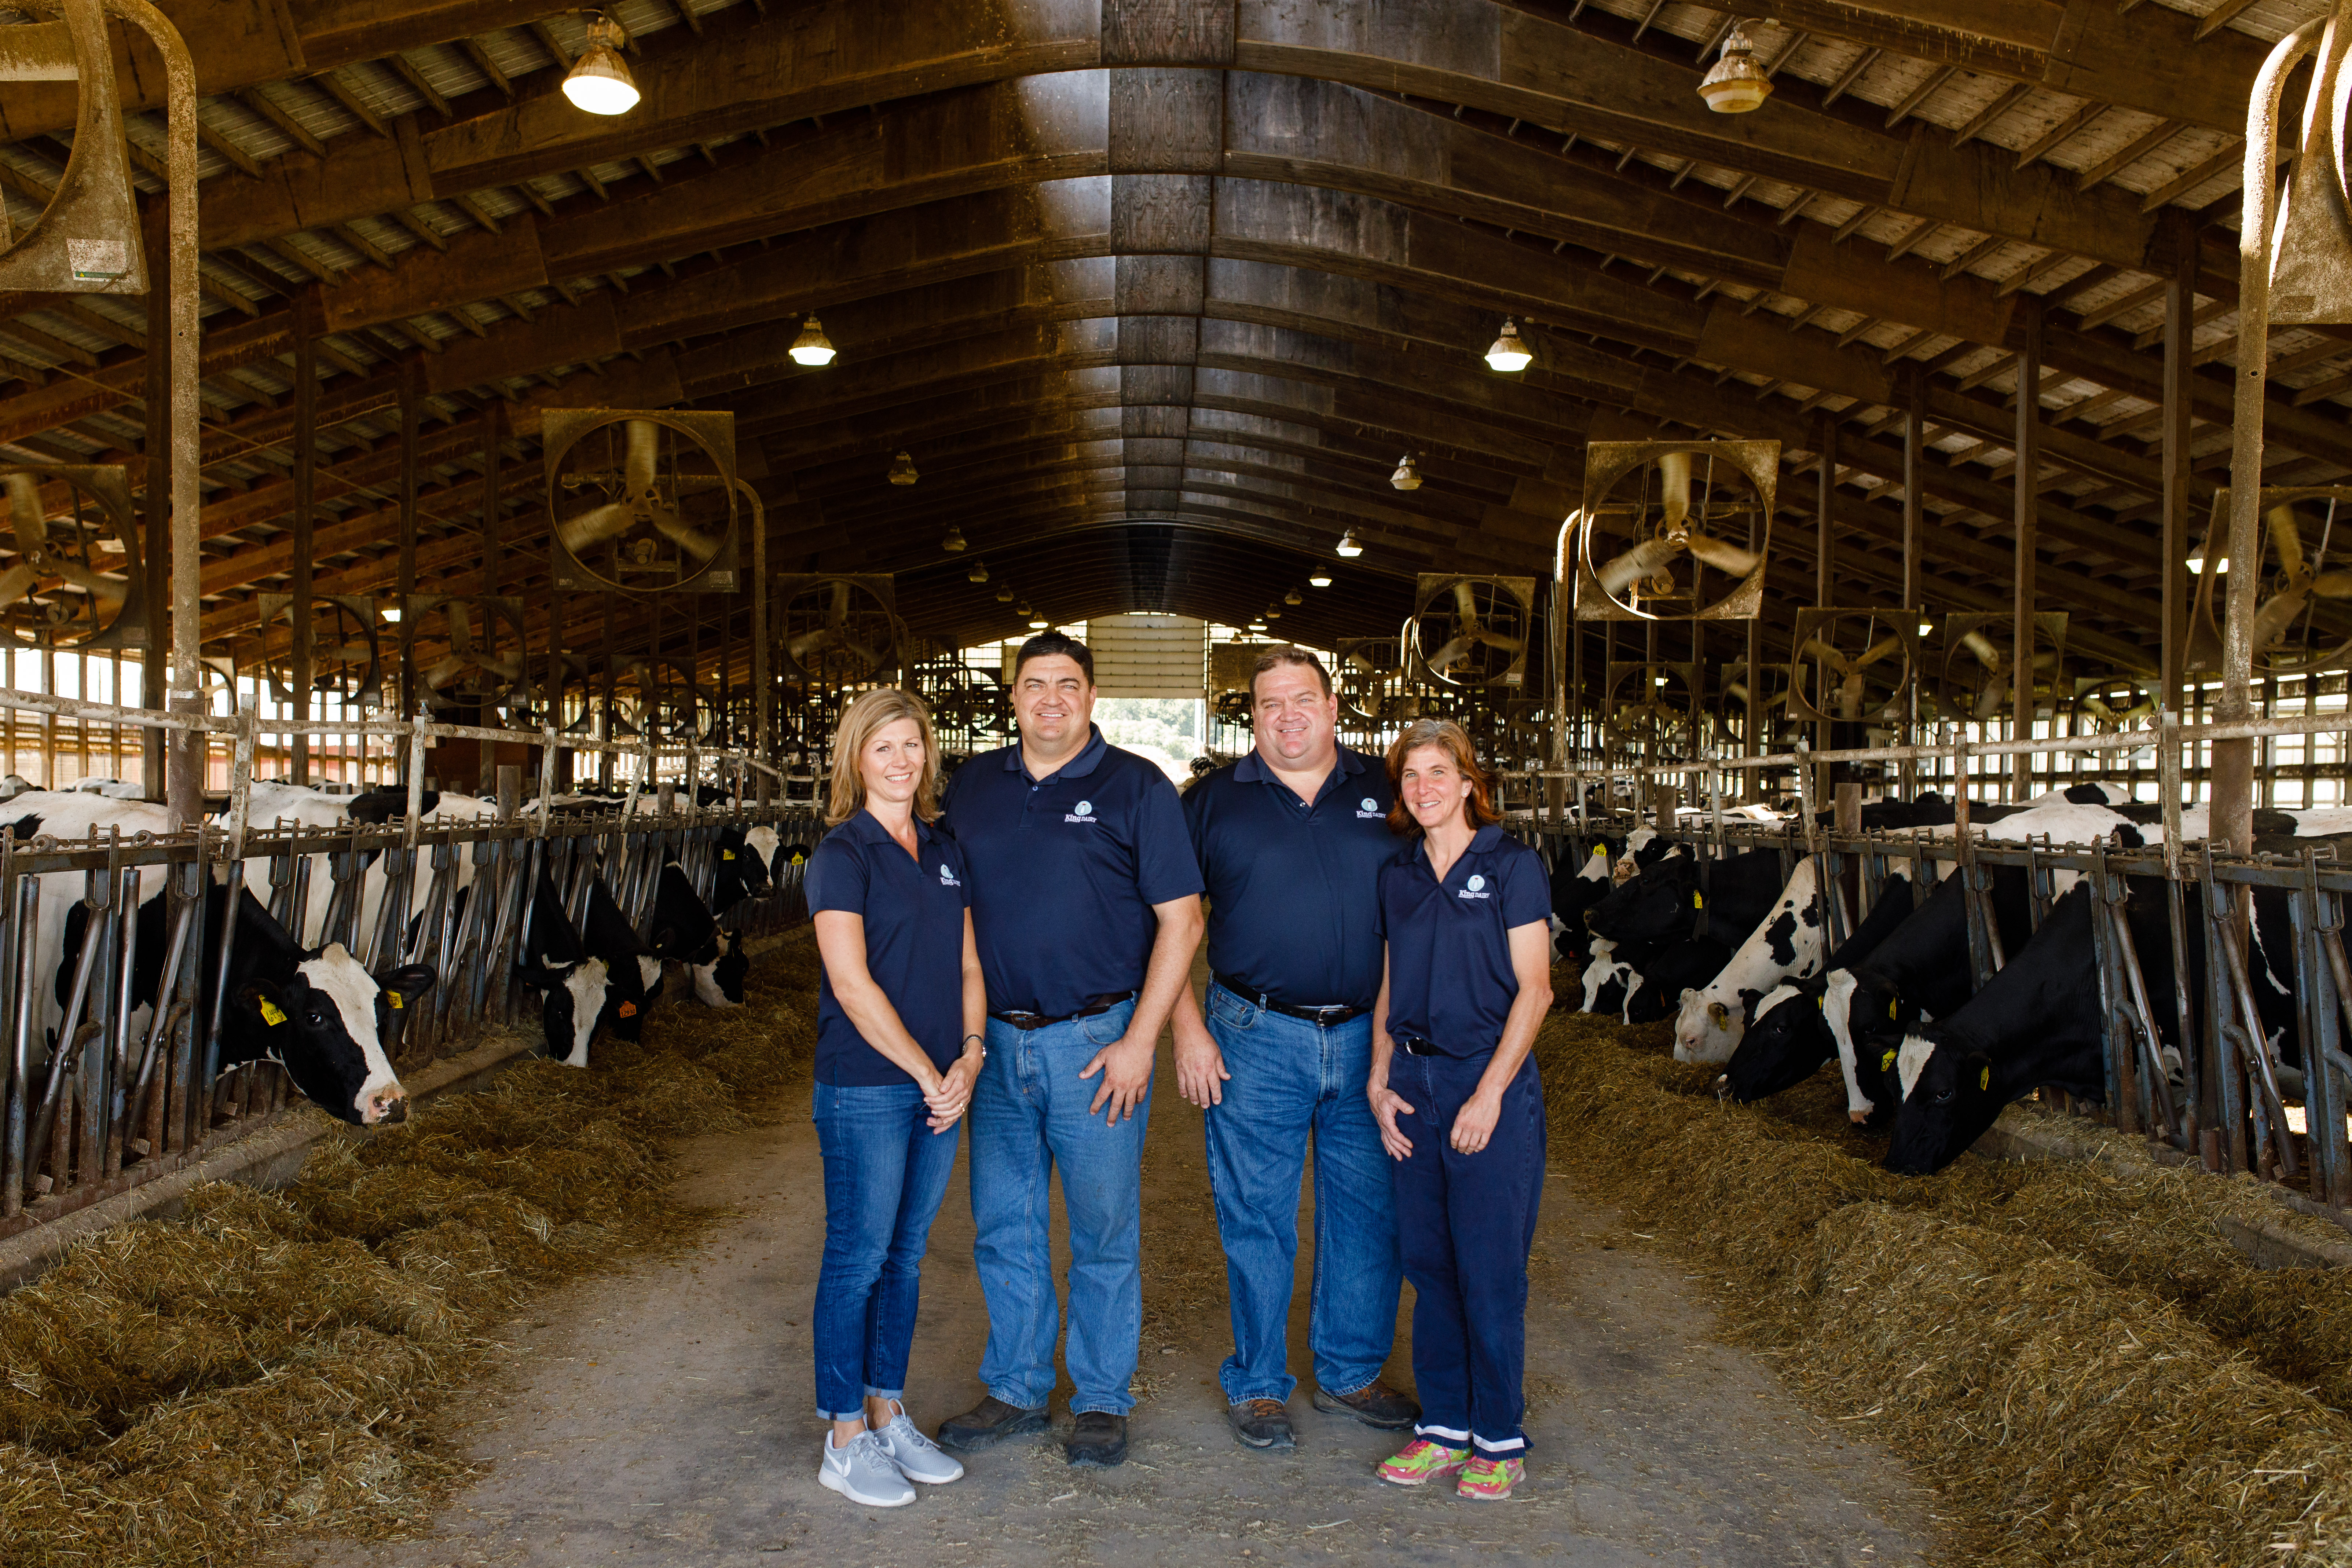 Schuylerville Dairy’s Home Delivery Featured in ‘Fun on the Farm’ Video Series